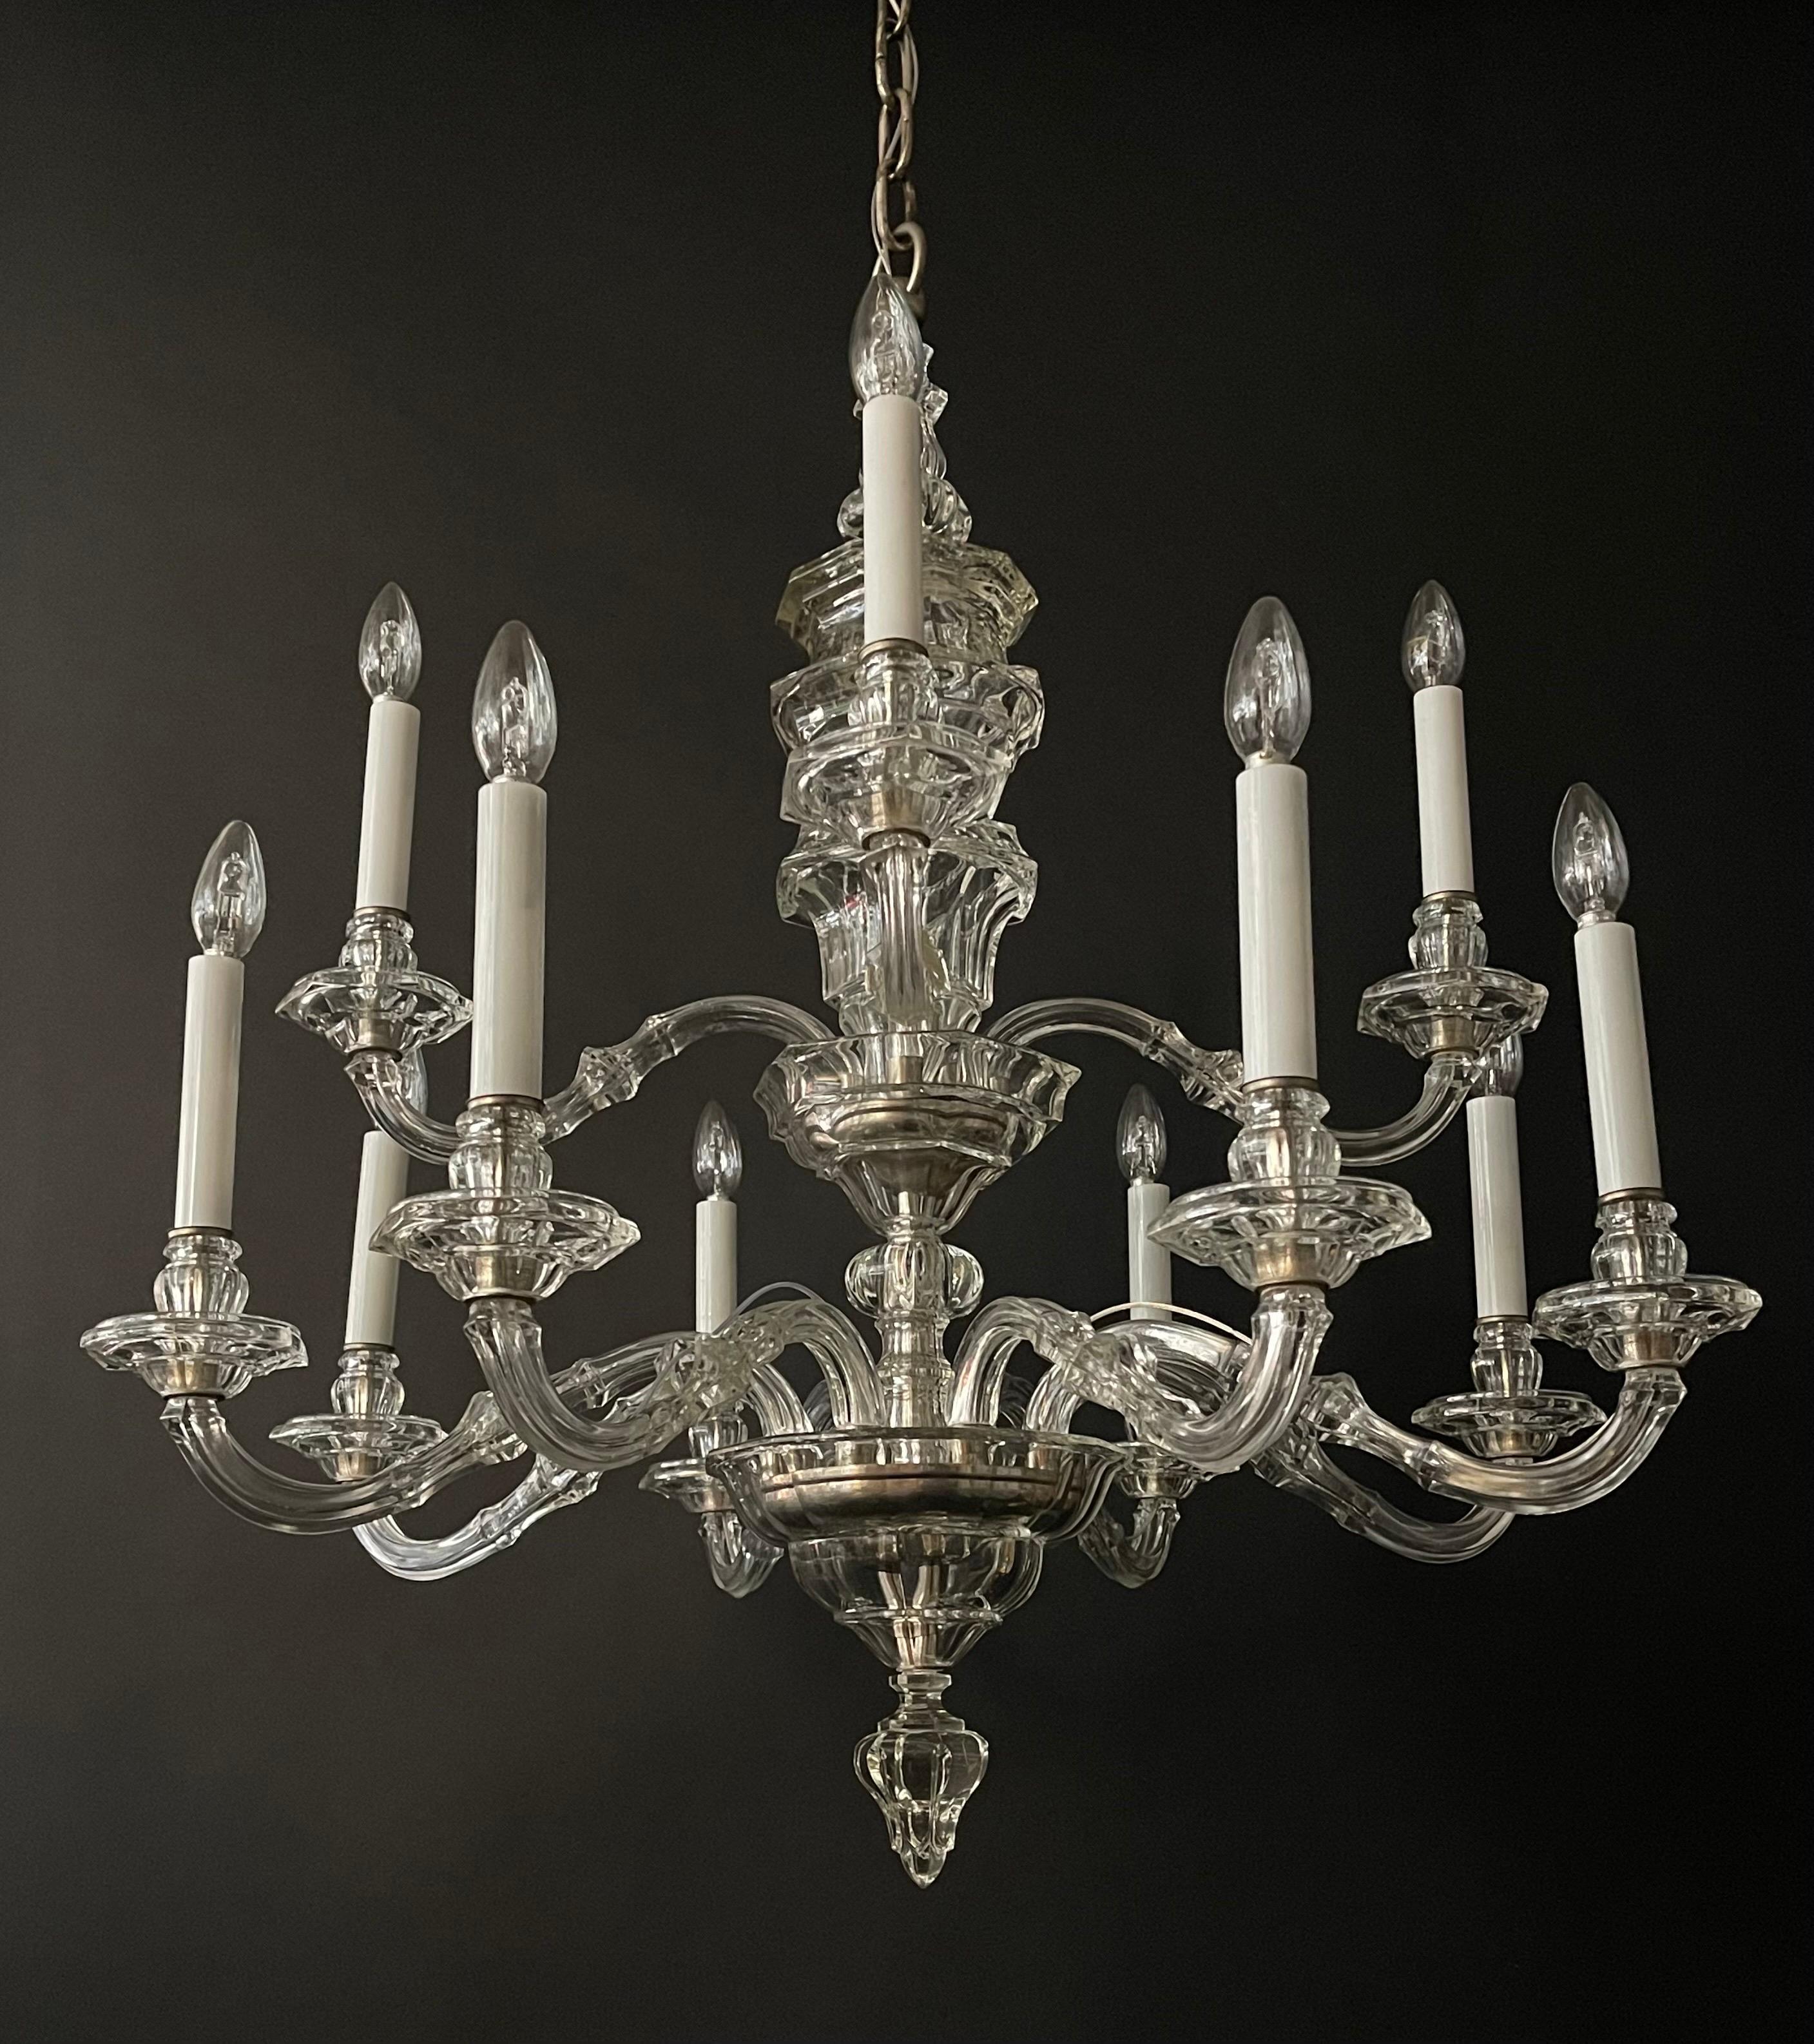 A wonderful, antique and very rare clear glass and silvered brass two- tiered, twelve-light chandelier by J. & L. Lobmeyr (signed), Vienna, Austria, Late 19th.
Measure: Diameter : 33.46 inches 
Height without chain and canopy : 39.37 inches